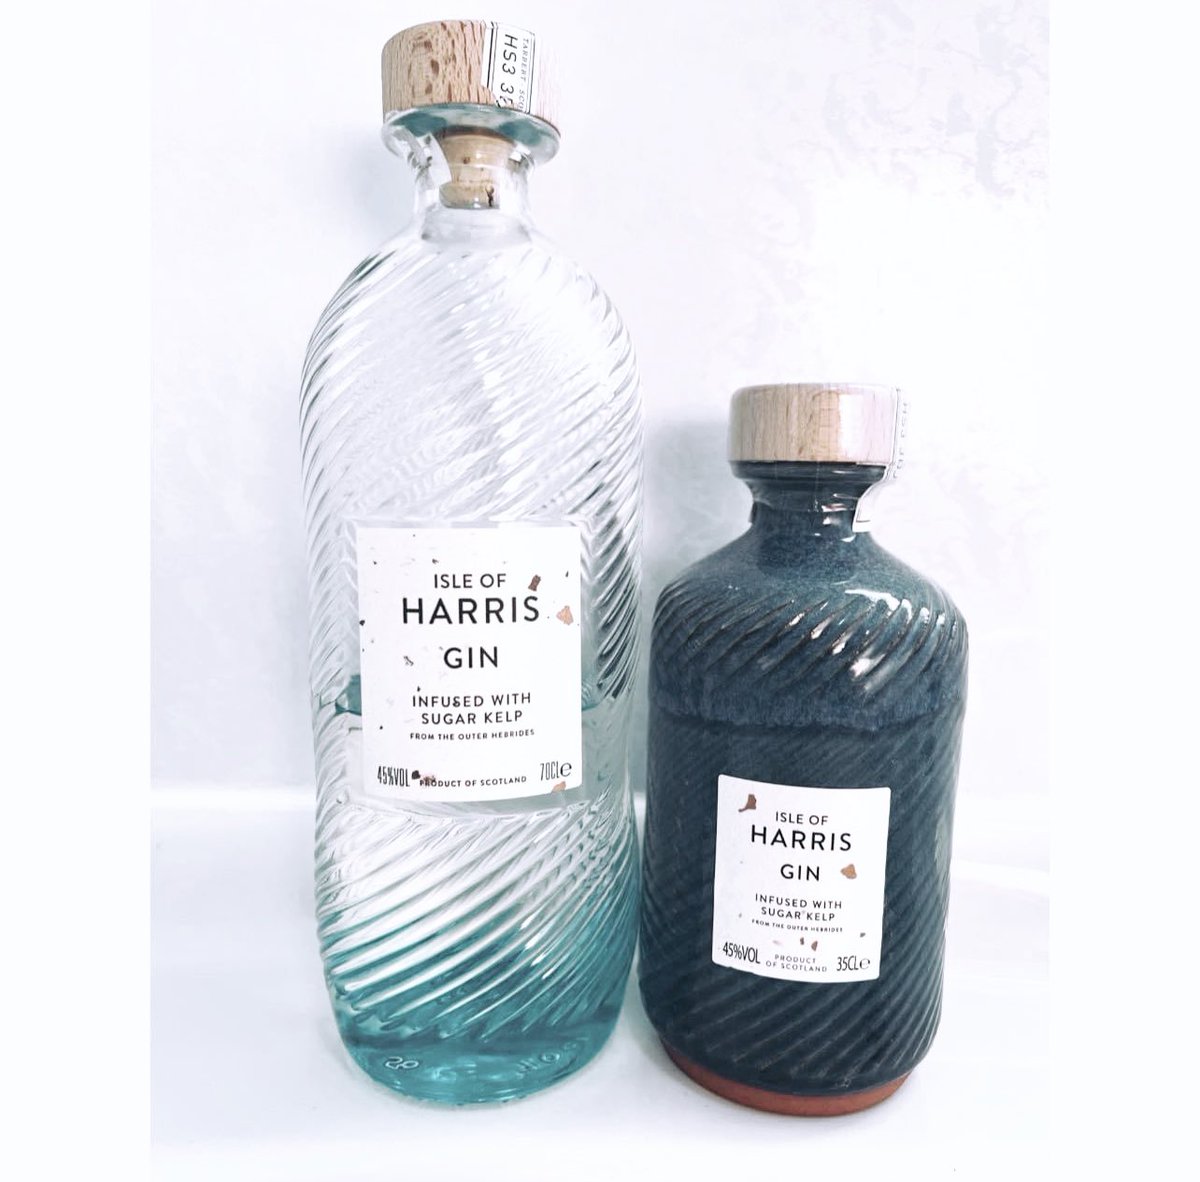 One of The Best Scottish made GIN from @harrisdistiller
#harrisgin #harrisdistilery

I was Very Fortune to Recieve a Isle of Harris Distillery Limited Edition ceilidh Bottles.

Served with a Wedge of Grapefruit & @WalterGTonic Original Tonic.